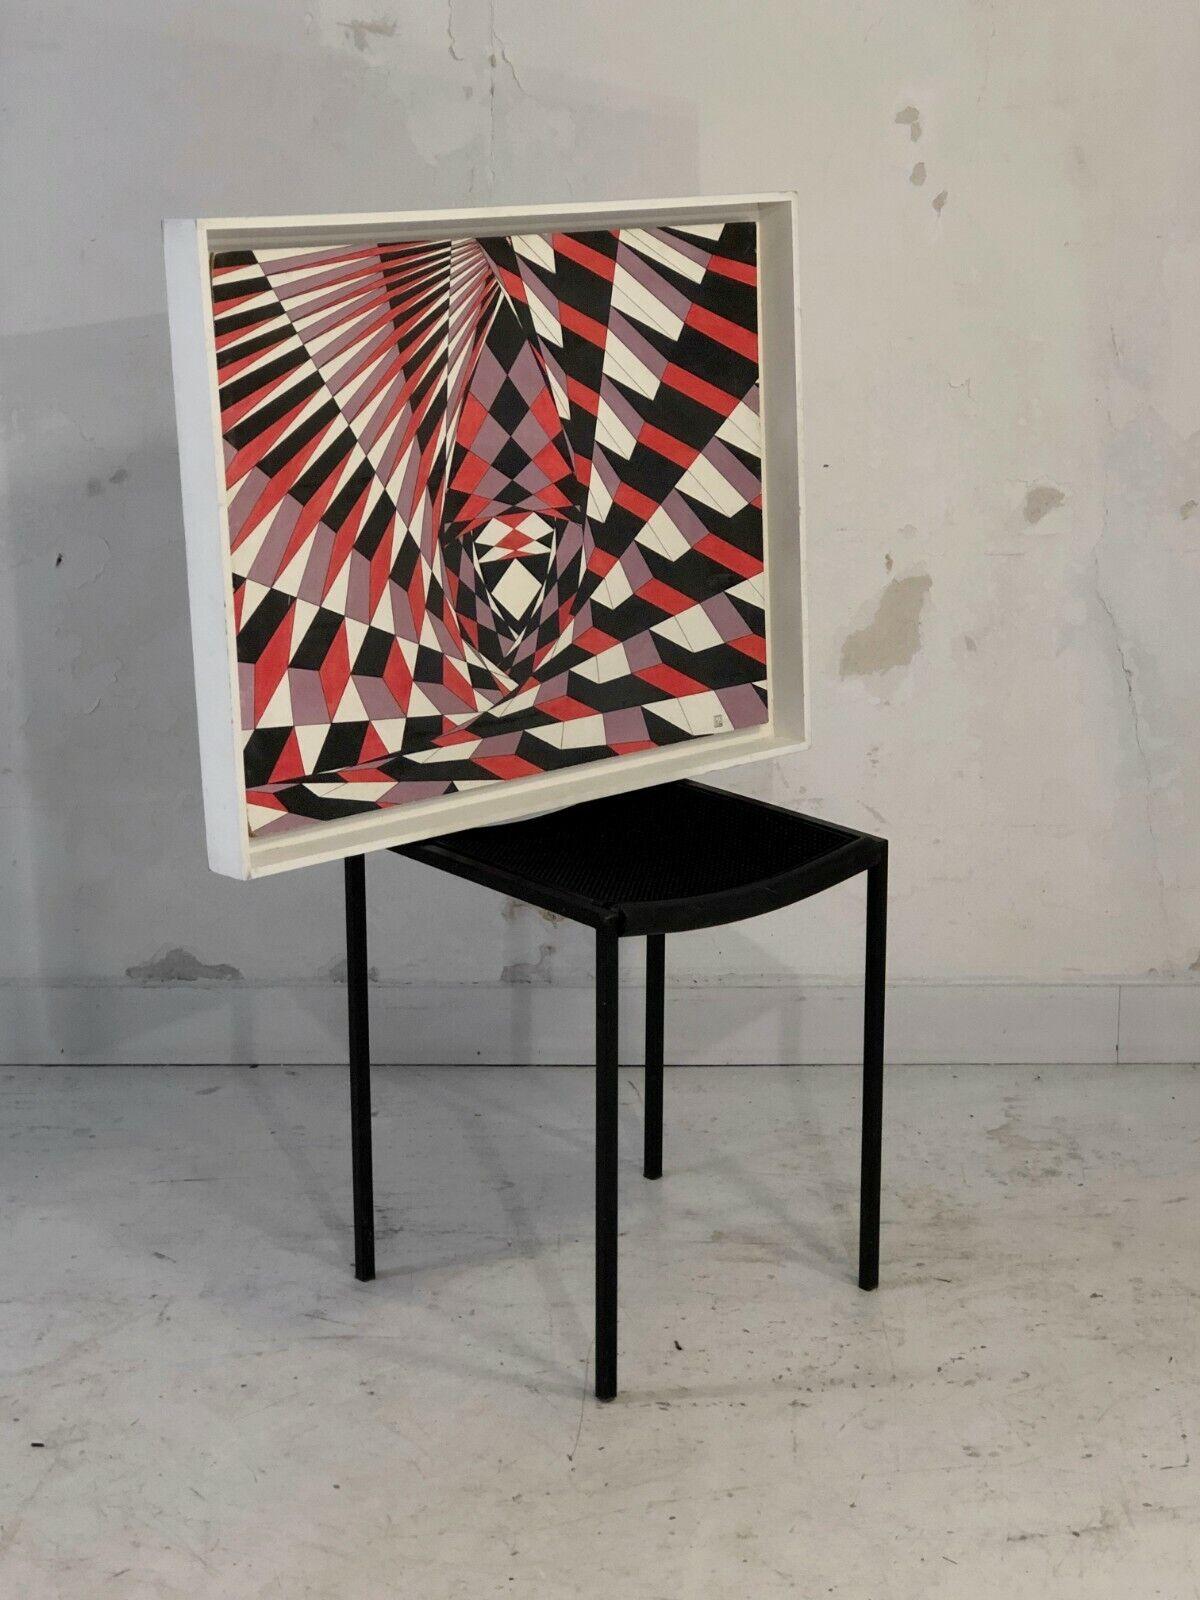 An OPTICAL POP OP-ART KINETIC PAINTING on Panel by GUY POUPPEZ, France 1968 For Sale 4